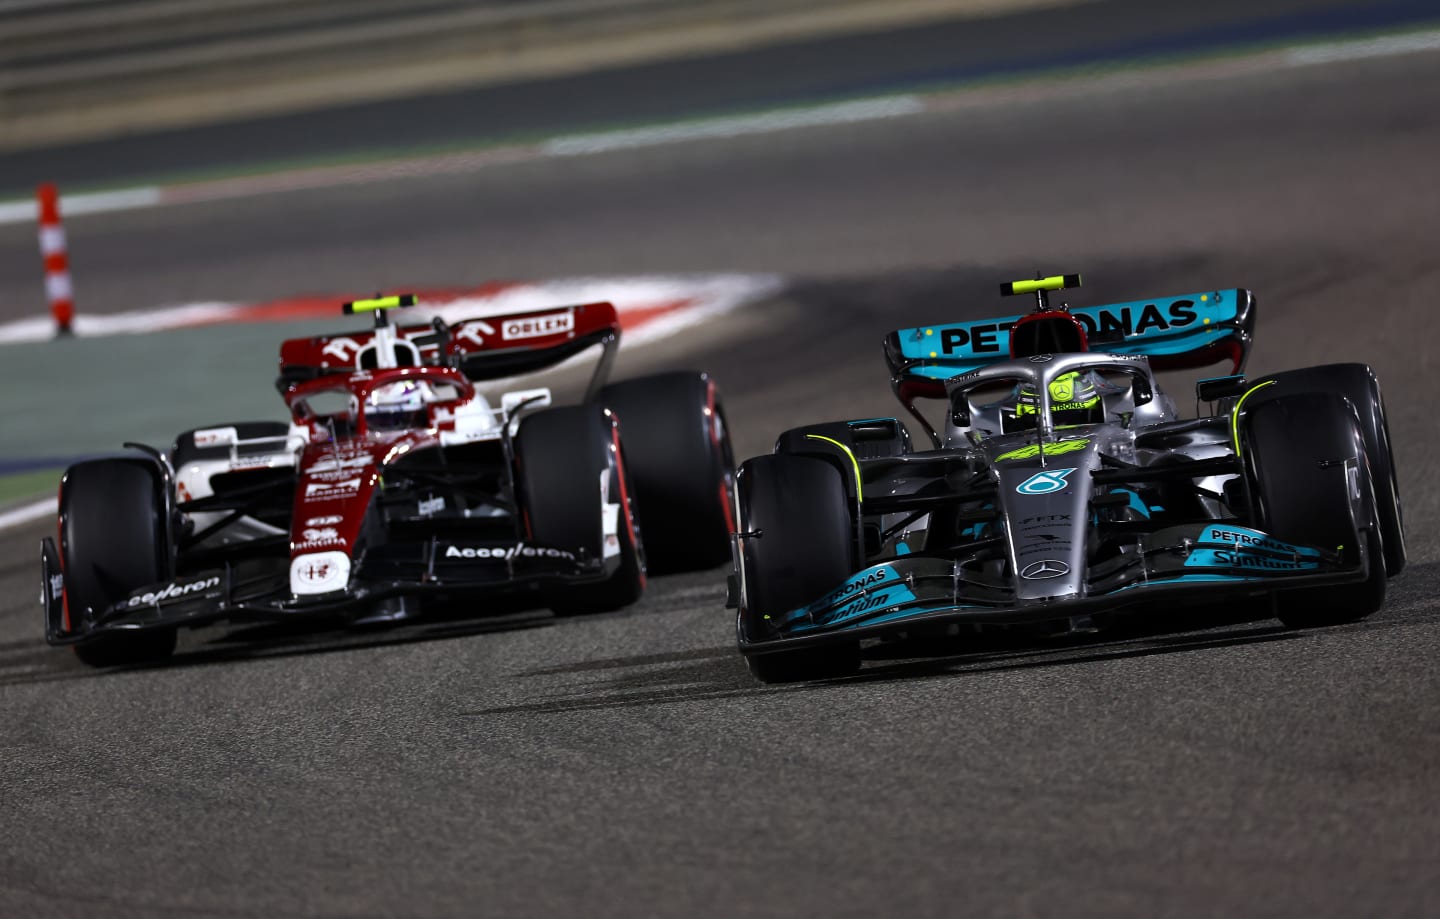 BAHRAIN, BAHRAIN - MARCH 20: Lewis Hamilton of Great Britain driving the (44) Mercedes AMG Petronas F1 Team W13 leads Zhou Guanyu of China driving the (24) Alfa Romeo F1 C42 Ferrari during the F1 Grand Prix of Bahrain at Bahrain International Circuit on March 20, 2022 in Bahrain, Bahrain. (Photo by Lars Baron/Getty Images)